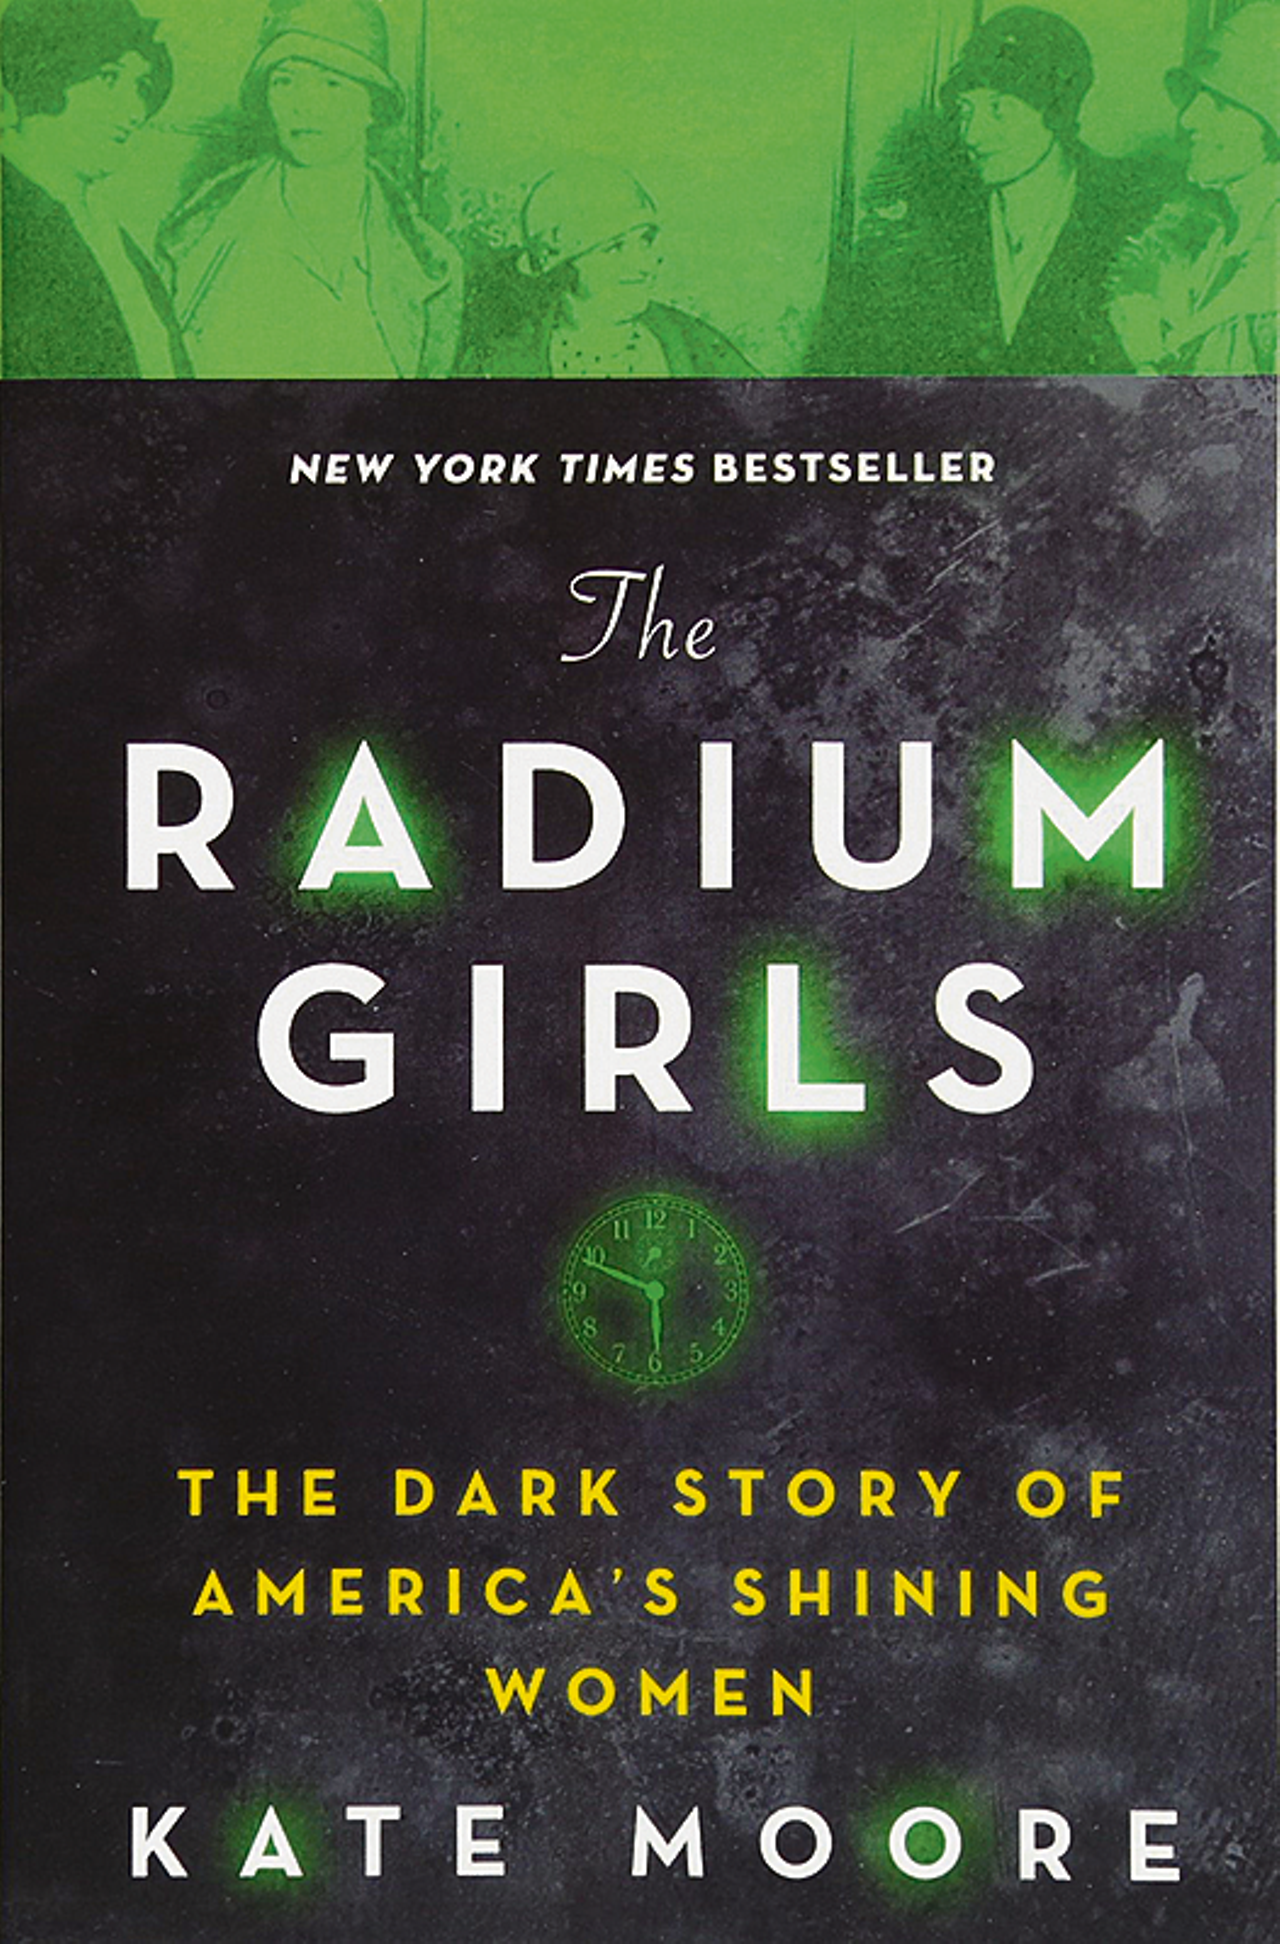 "This incredibly well-researched historical narrative follows the vibrant and tragic true lives of America’s 'Radium Girls,' female factory workers in the 1920s who were poisoned by the radium paint they worked with to apply luminous numbers to clocks and dials. The Undark paint was a huge fad in home décor and military applications, and these women spent all day lip-pointing brushes dipped in the lethal substance — at the instruction of their employers — ingesting and digesting deadly amounts of glowing poison. When the women started falling ill from radiation sickness — stories detail bone fractures, jaw necrosis, rotting and putrid teeth, shattered hips and femurs — questions about health, safety and the workplace were raised that forever changed our labor laws." — Maija Zummo, CityBeat editor